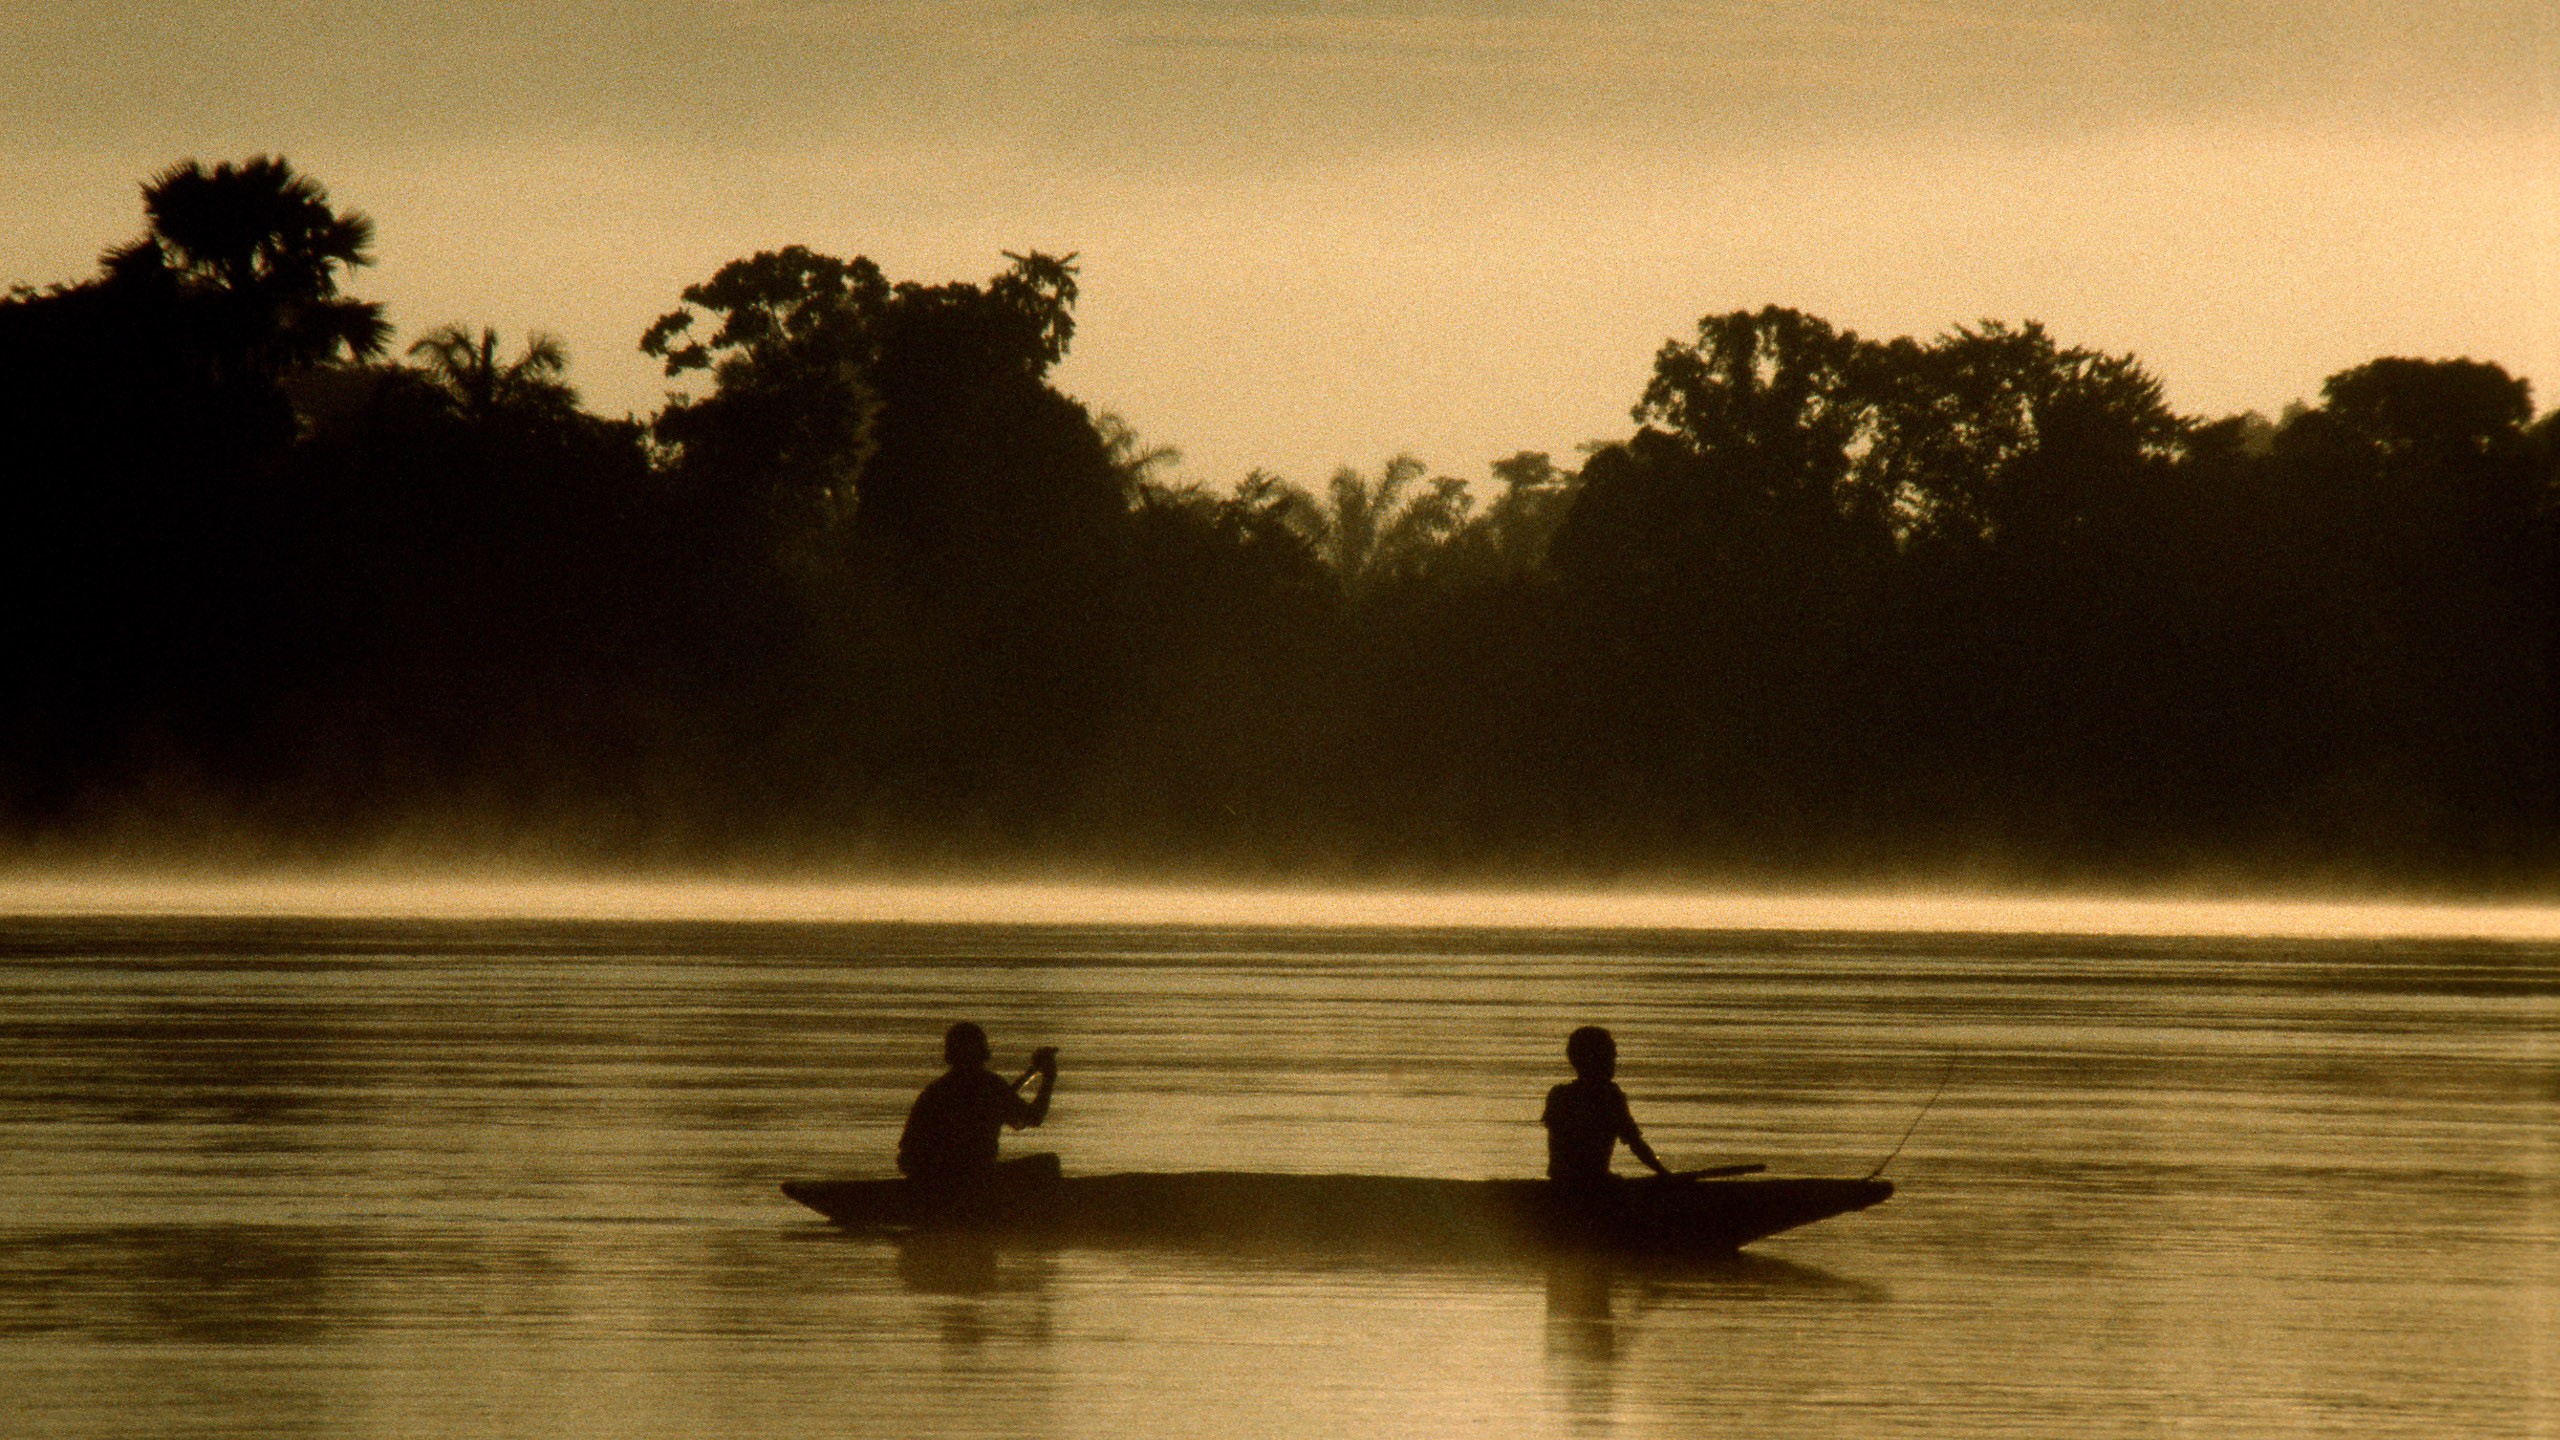 General 2560x1440 river jungle silhouette canoes nature